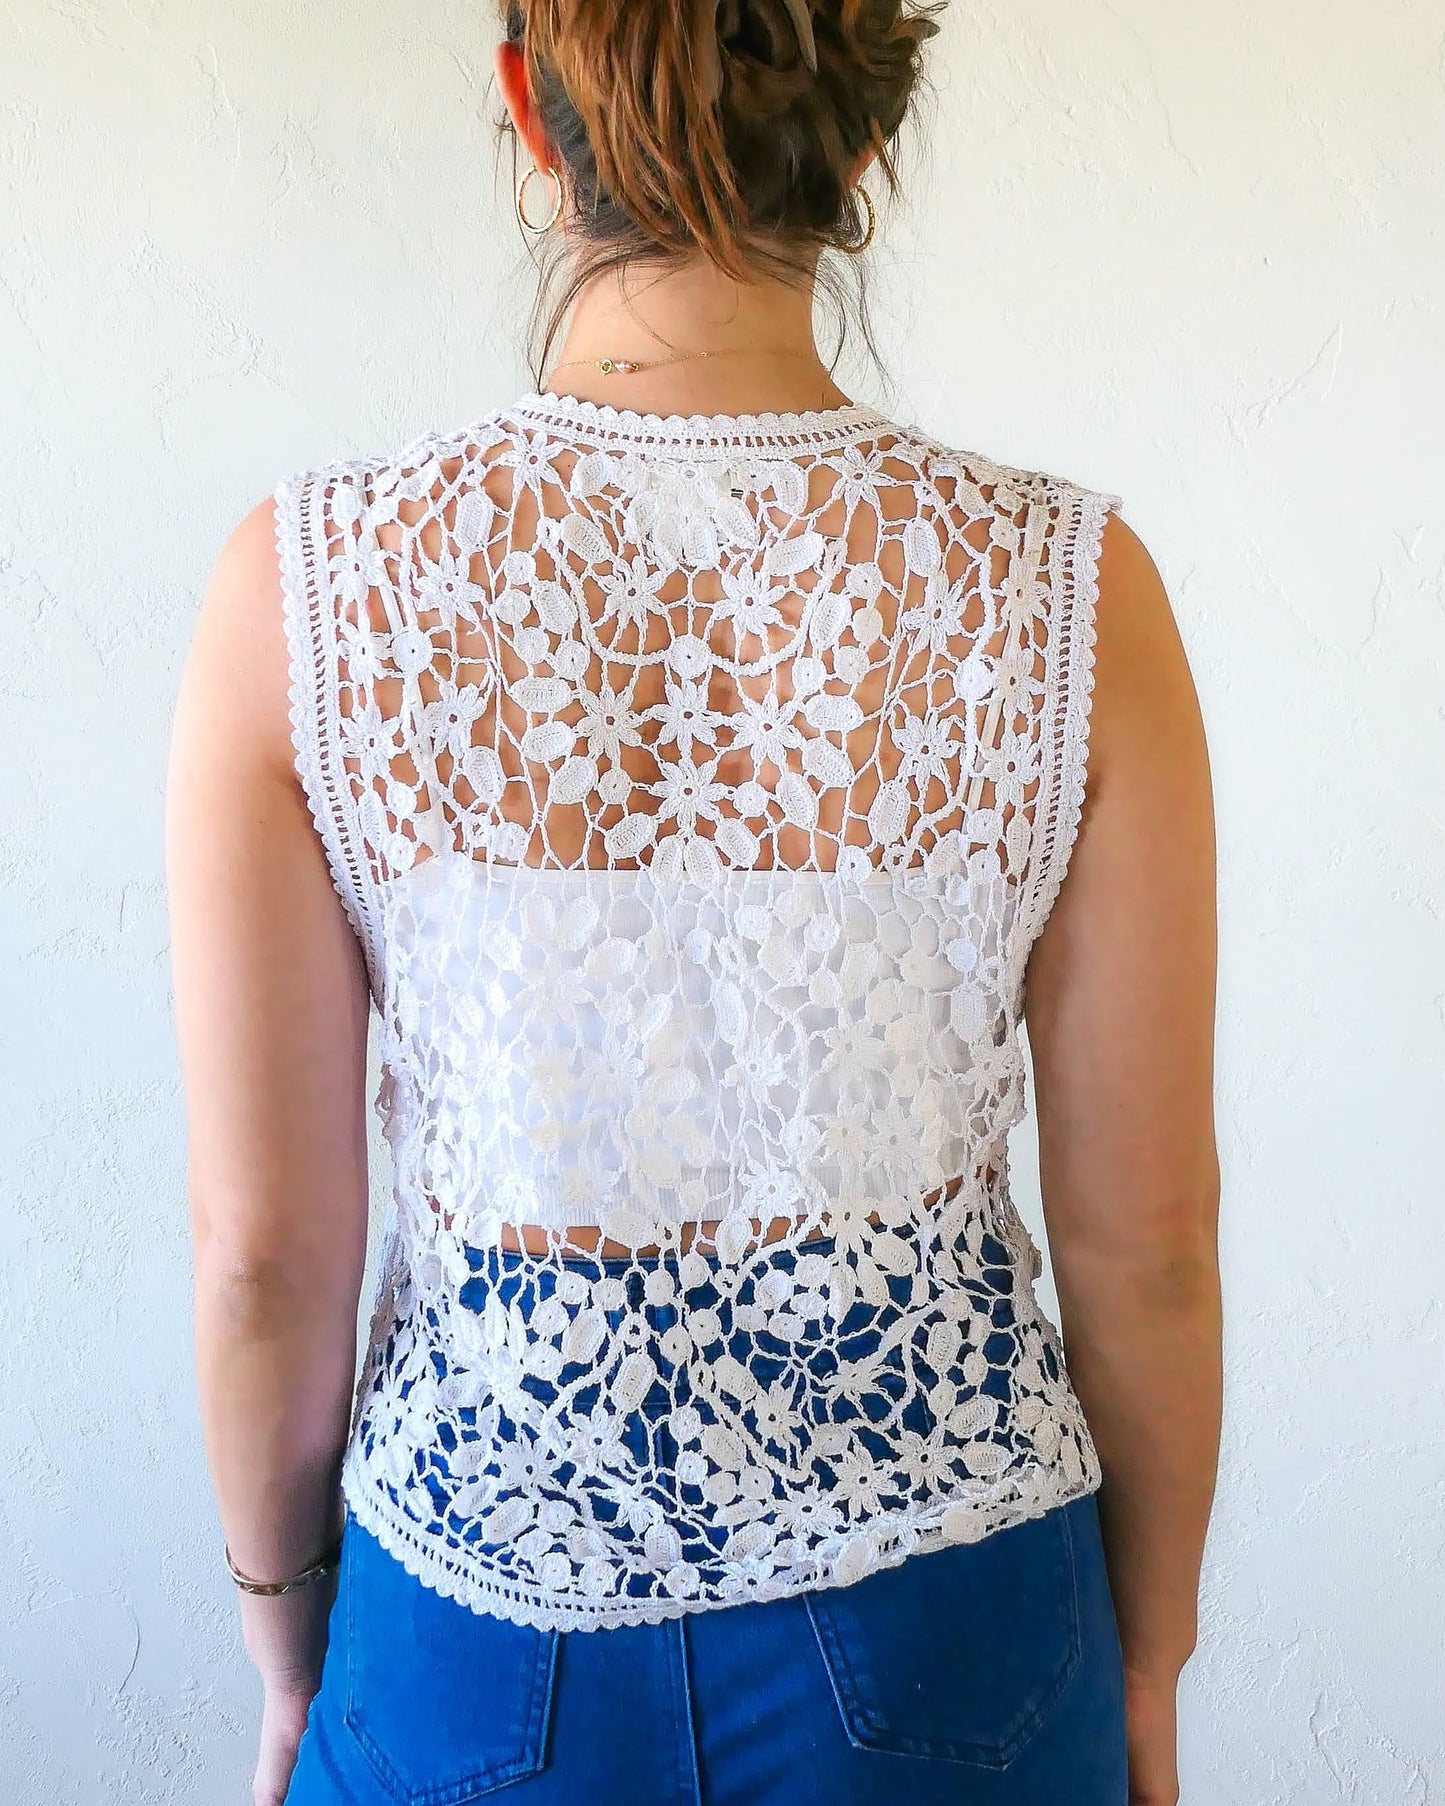 Back view of vest. A Lim's Vintage original hand crocheted vest from the 1990s with a repeating jasmine floral and leaf motif throughout. Refined, delicate, and a vintage accent to your everyday wardrobe. Buttons up the front but can also be left open and worn over a bikini bra, tank top, or even a long sleeve shirt or blouse during cooler months. Due to the handmade nature of this vest, the length and bust circumference may vary slightly from piece to piece. Model is wearing white color vest.